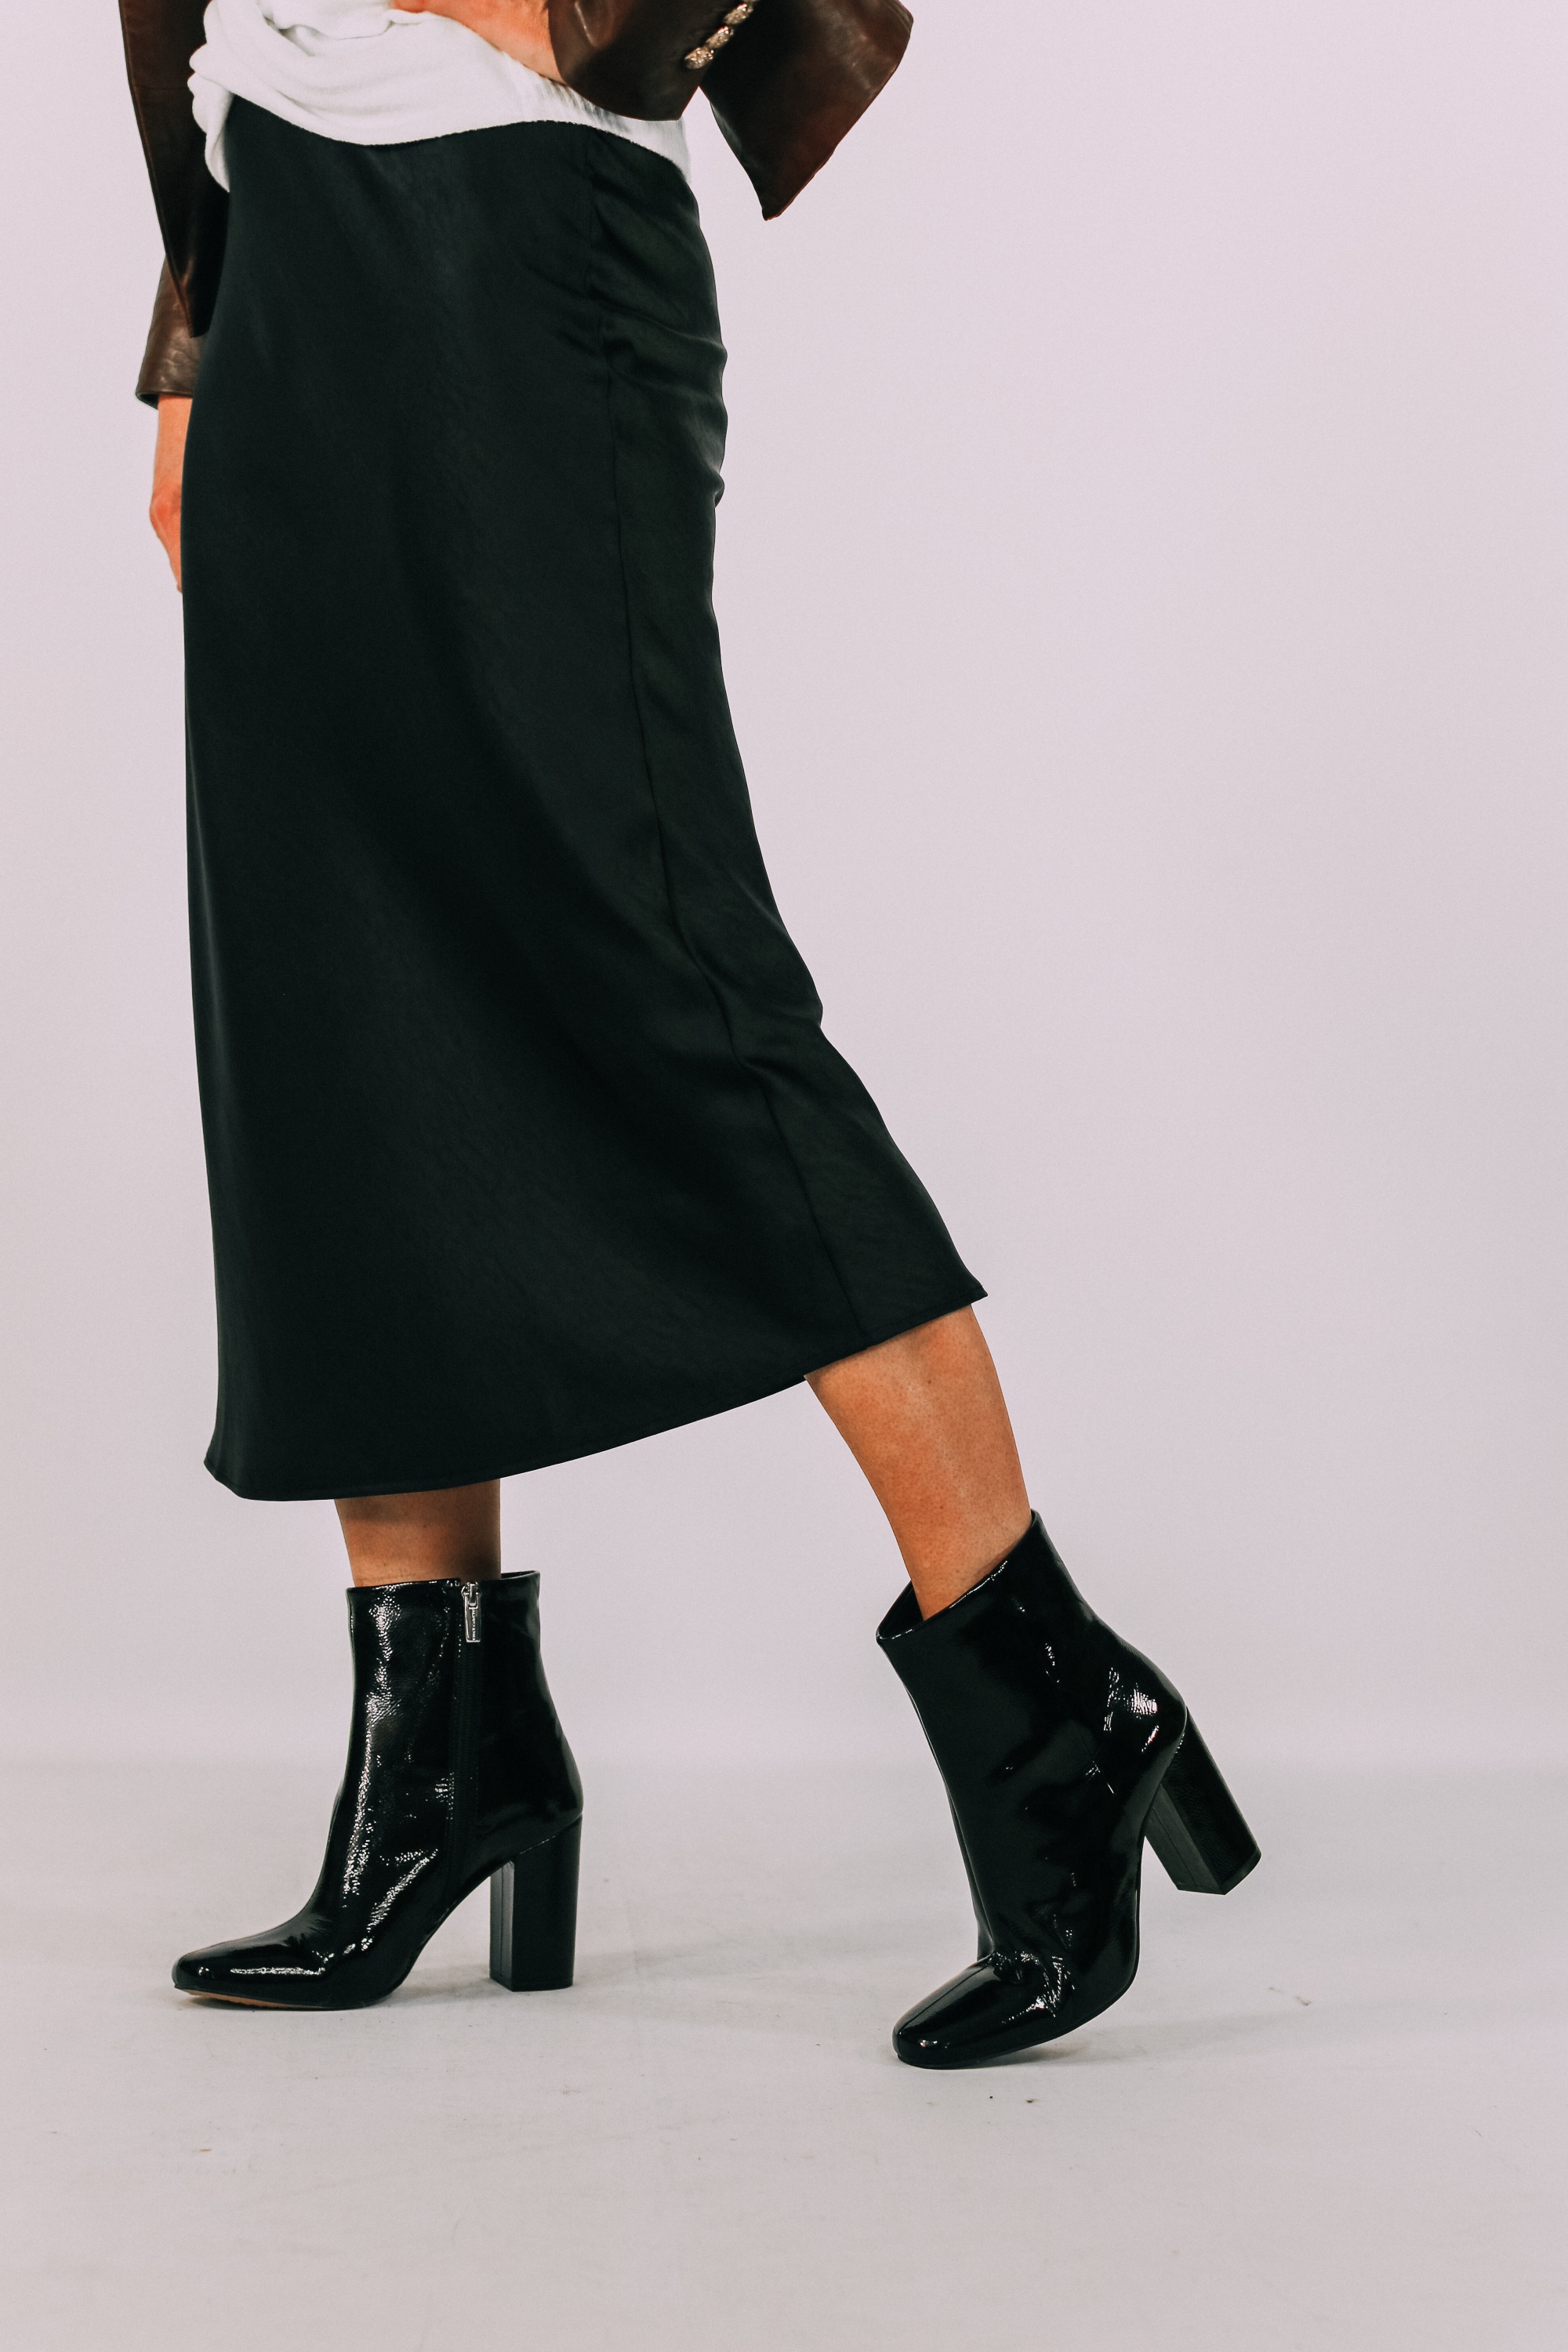 Square Toe Booties, Fashion blogger Erin Busbee of BusbeeStyle.com featuring black patent square toe booties by Vince Camuto with a satin black midi skirt in Telluride, CO